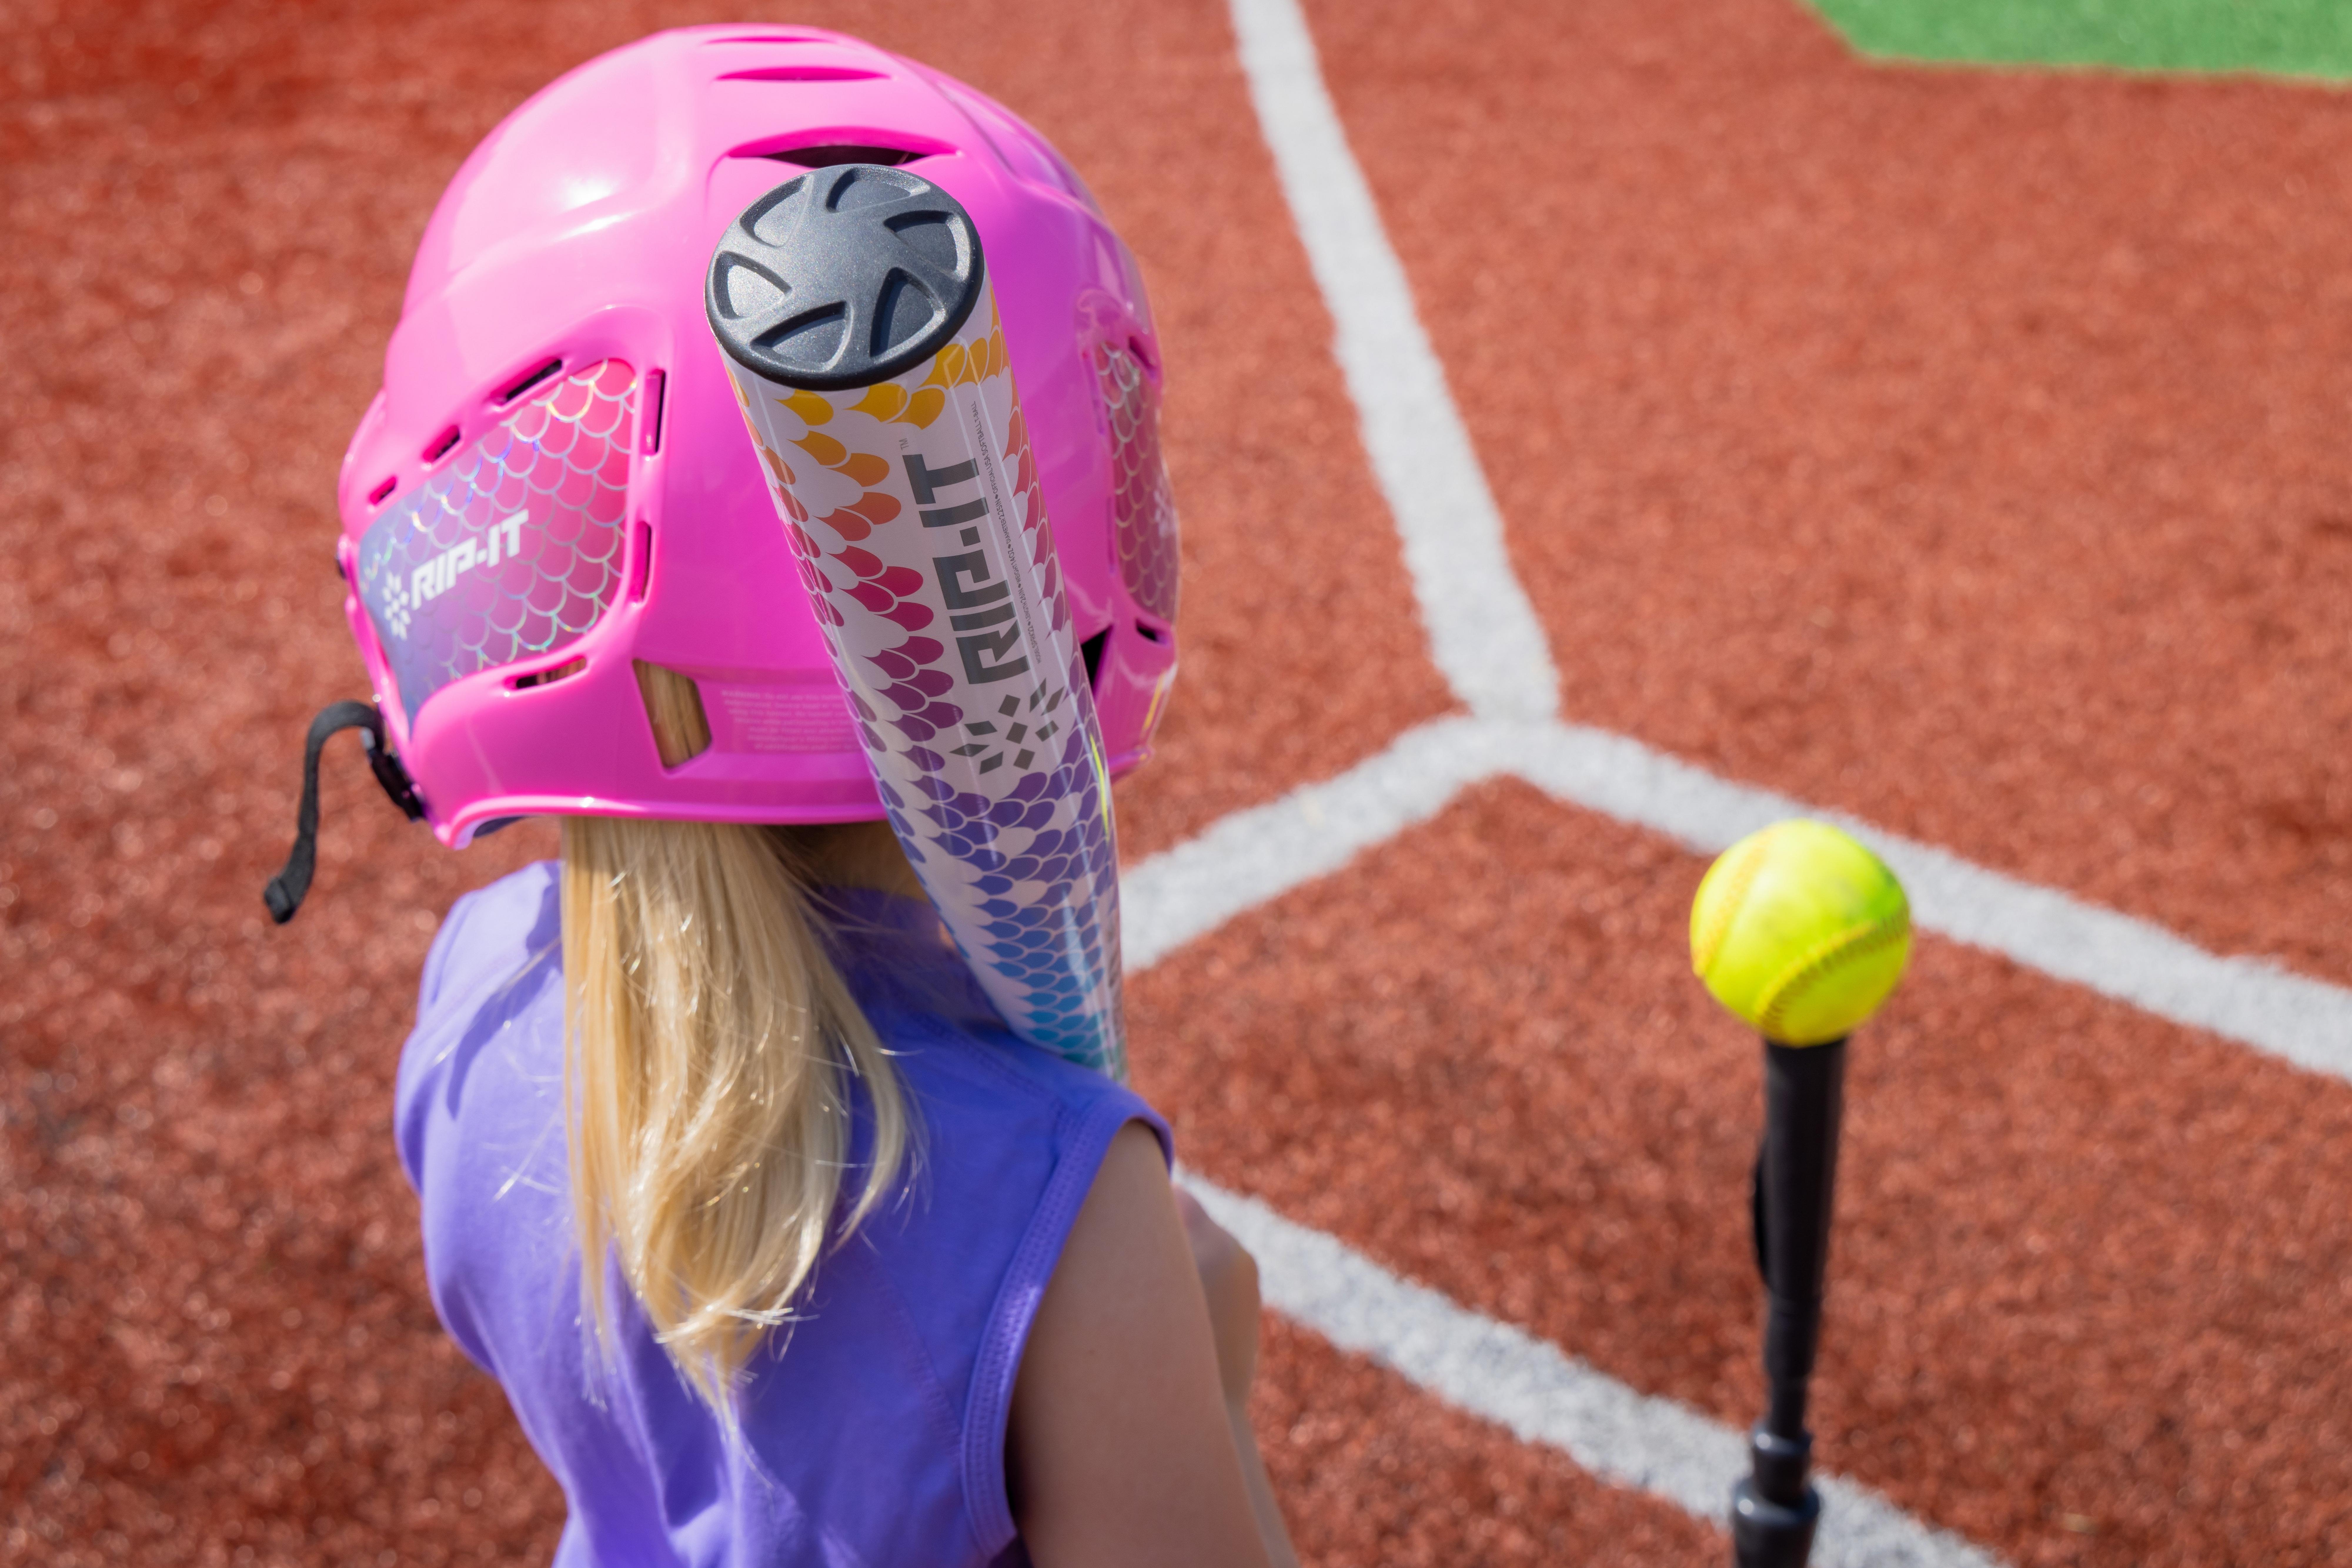  RIP-IT, Stardust Girls Fastpitch Softball Bat, 1 Pc.  Aluminum, Approved for All Fields, 28, Pink/Blue